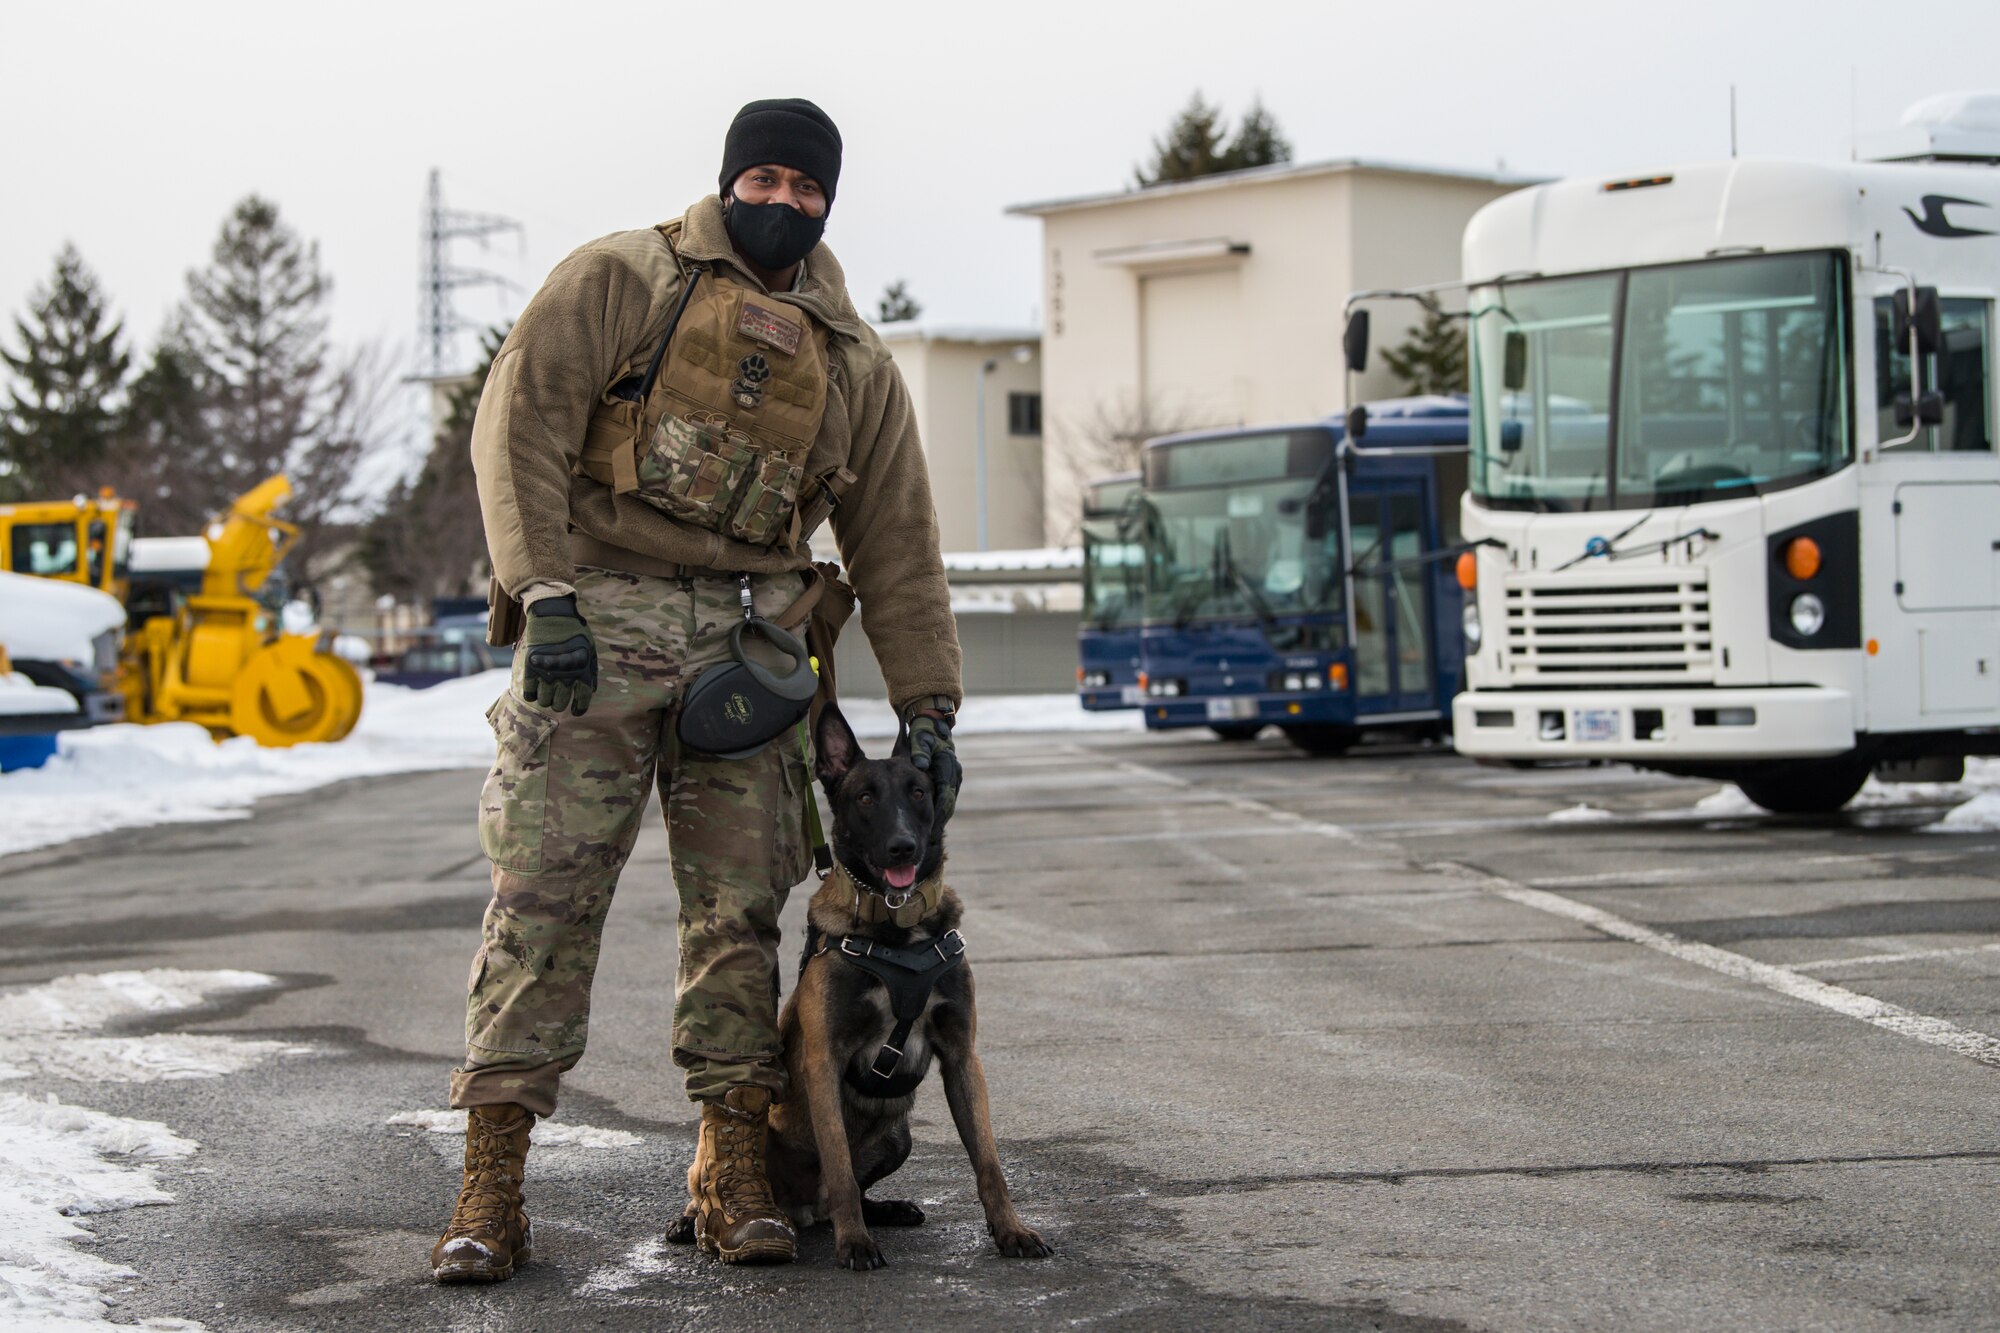 Man in uniform stands in a snowy parking lot next to his sitting dog, while they both look at the camera.